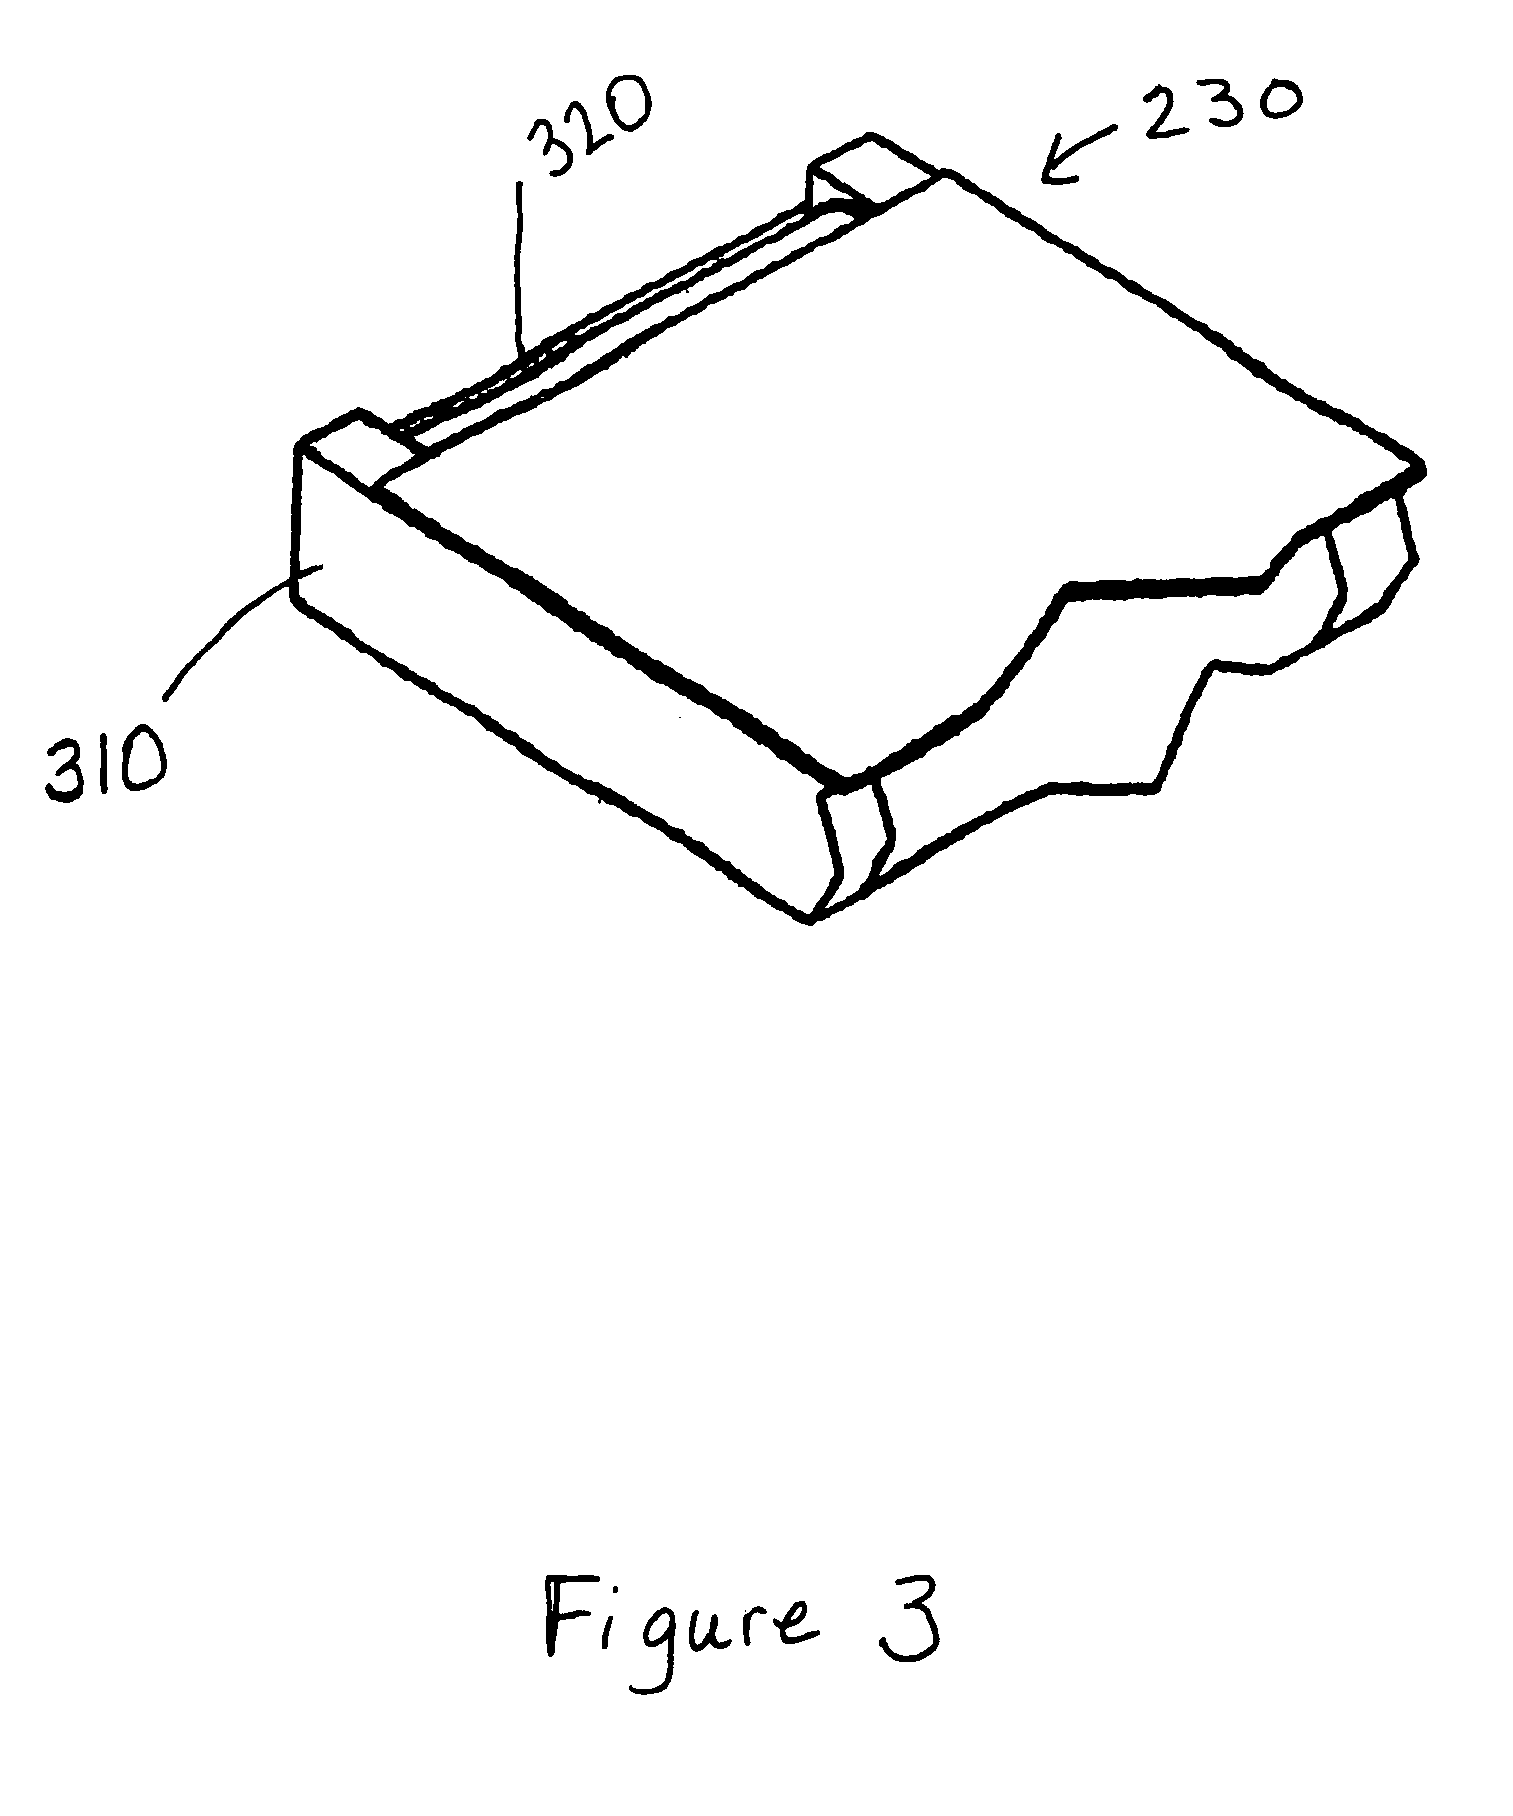 Method for curing high internal phase emulsions